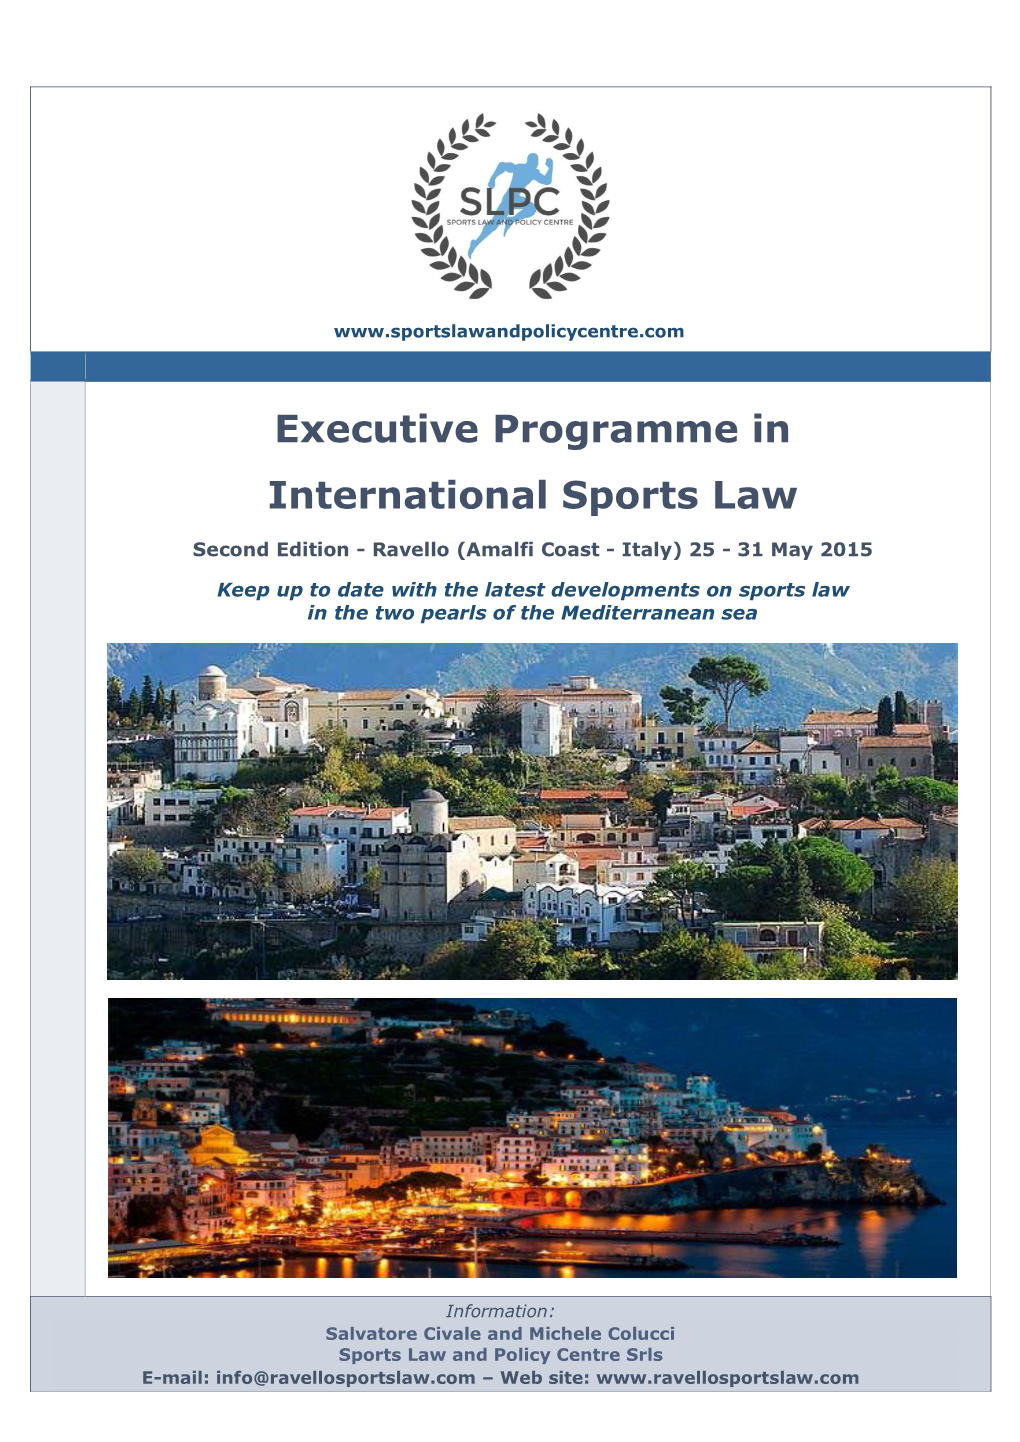 Executive Programme in International Sports Law